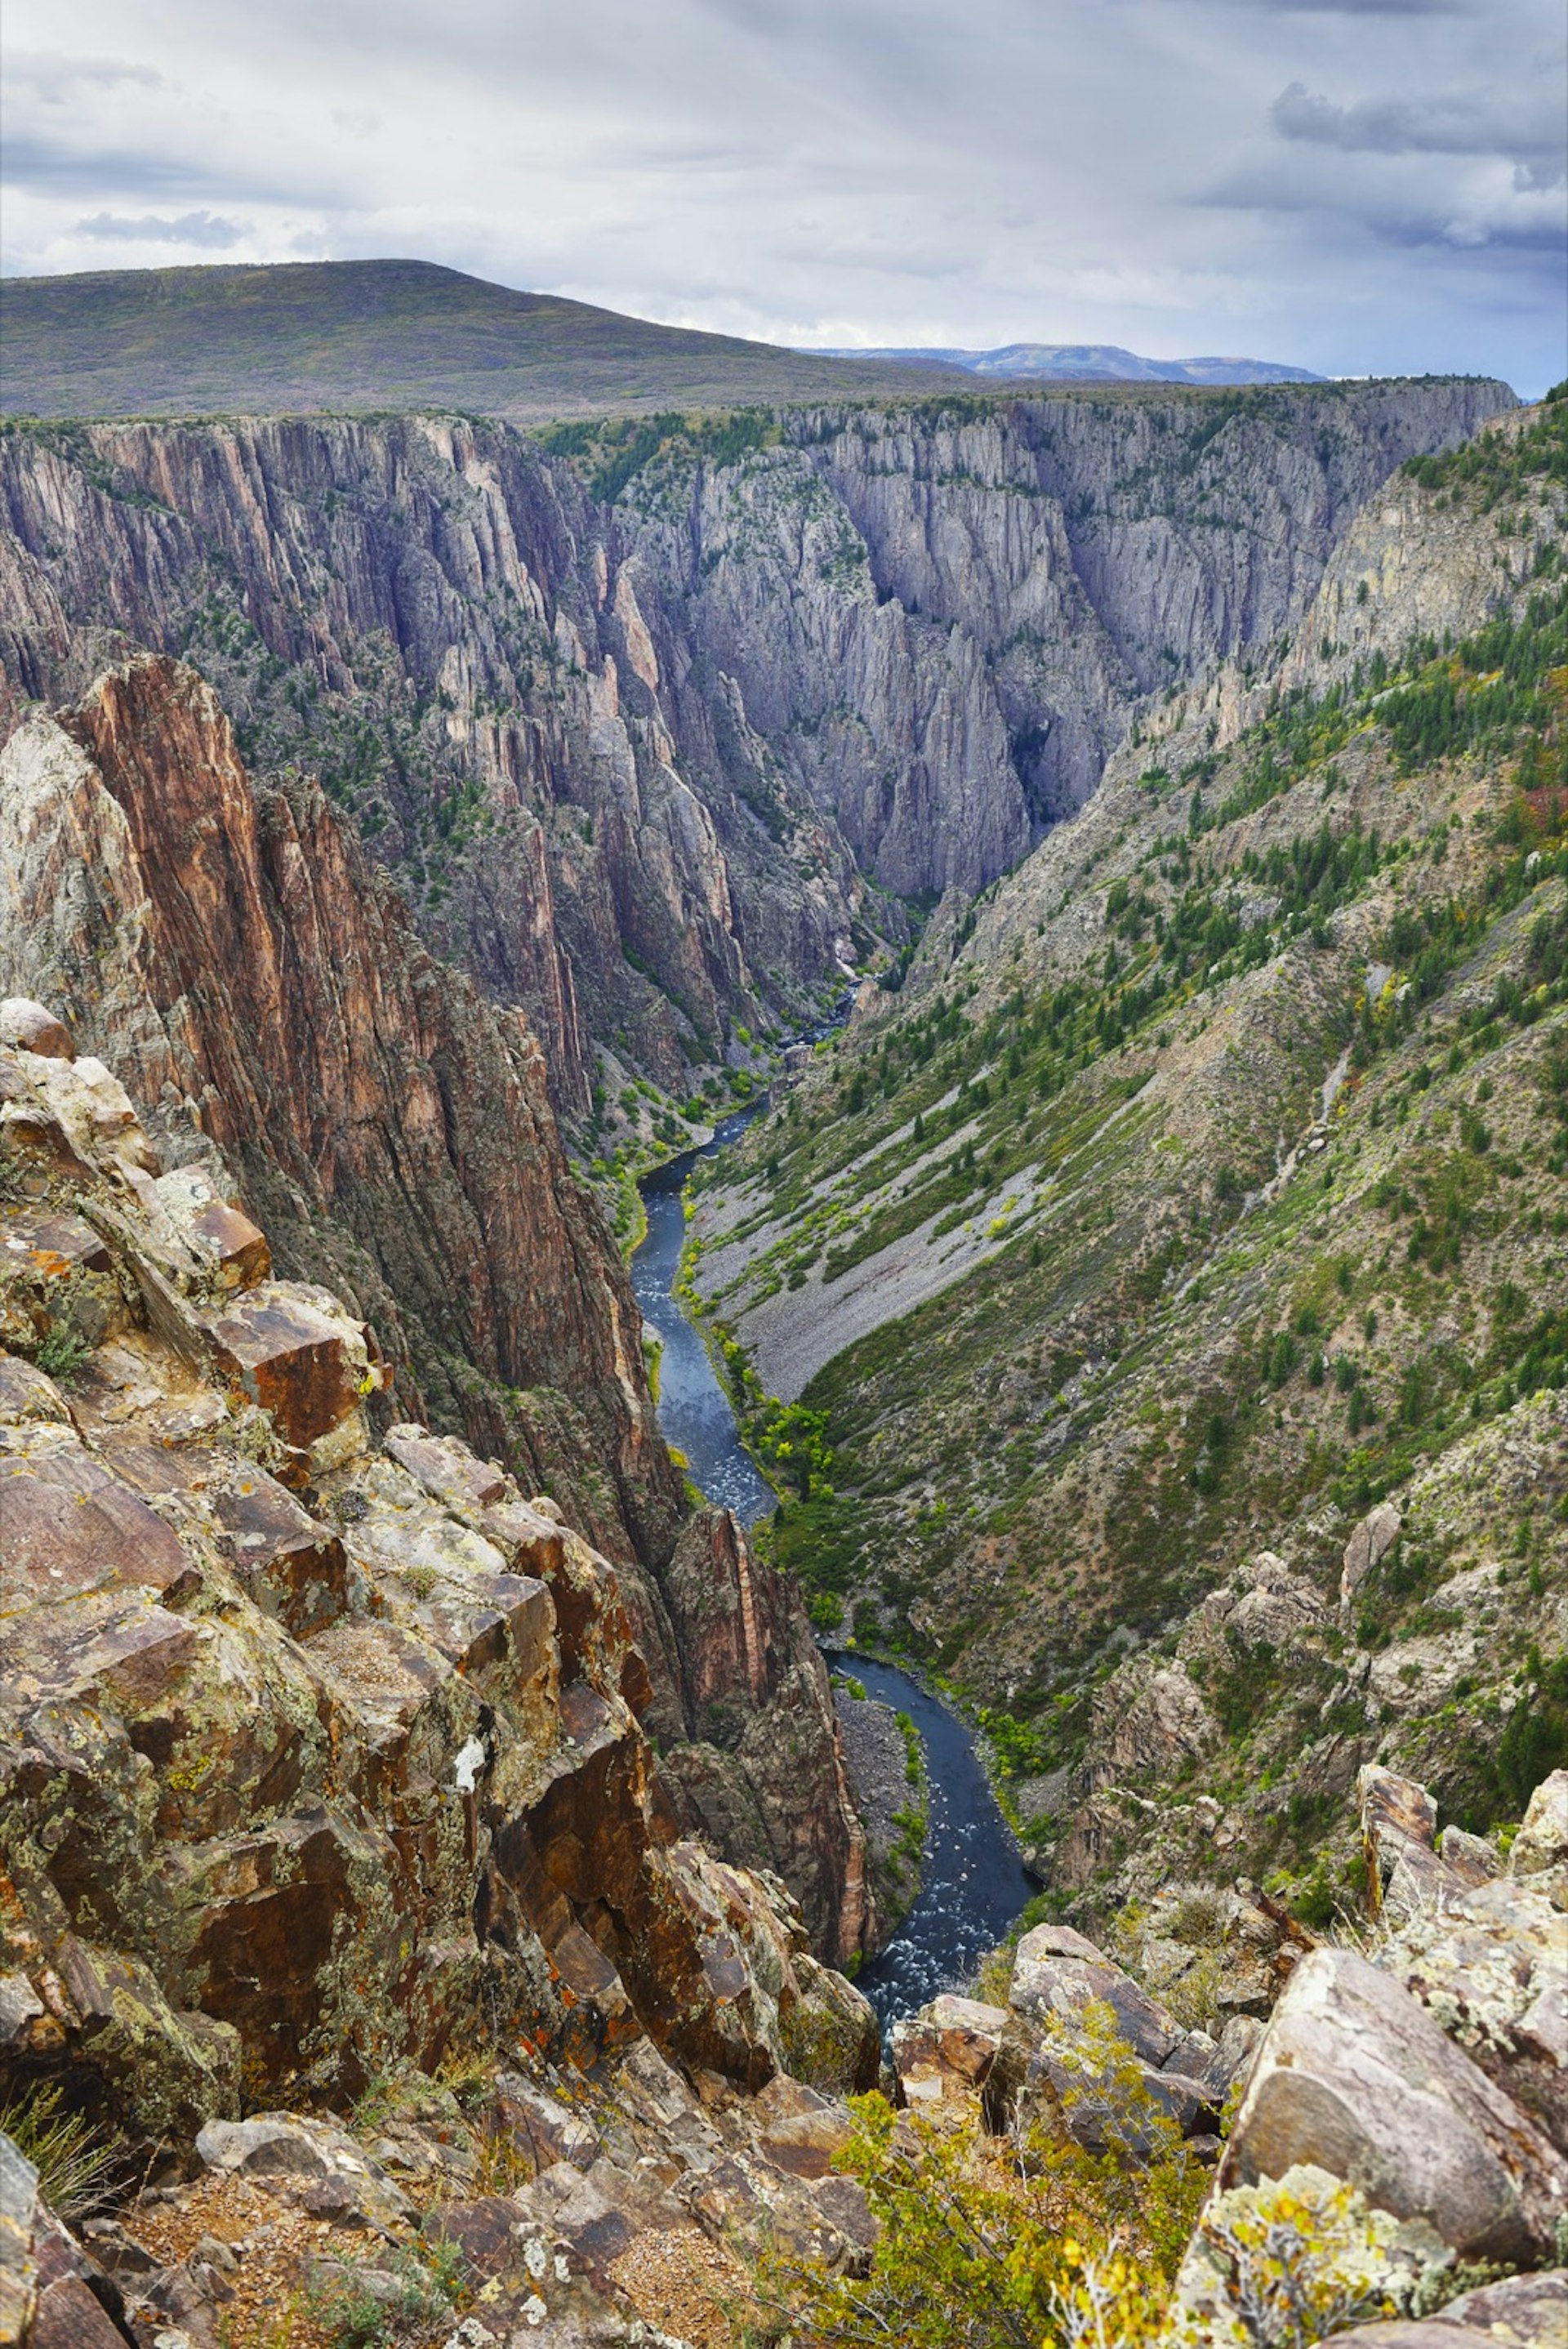 The deep gully of the Black Canyon of the Gunnison National Park with the Gunnison River below